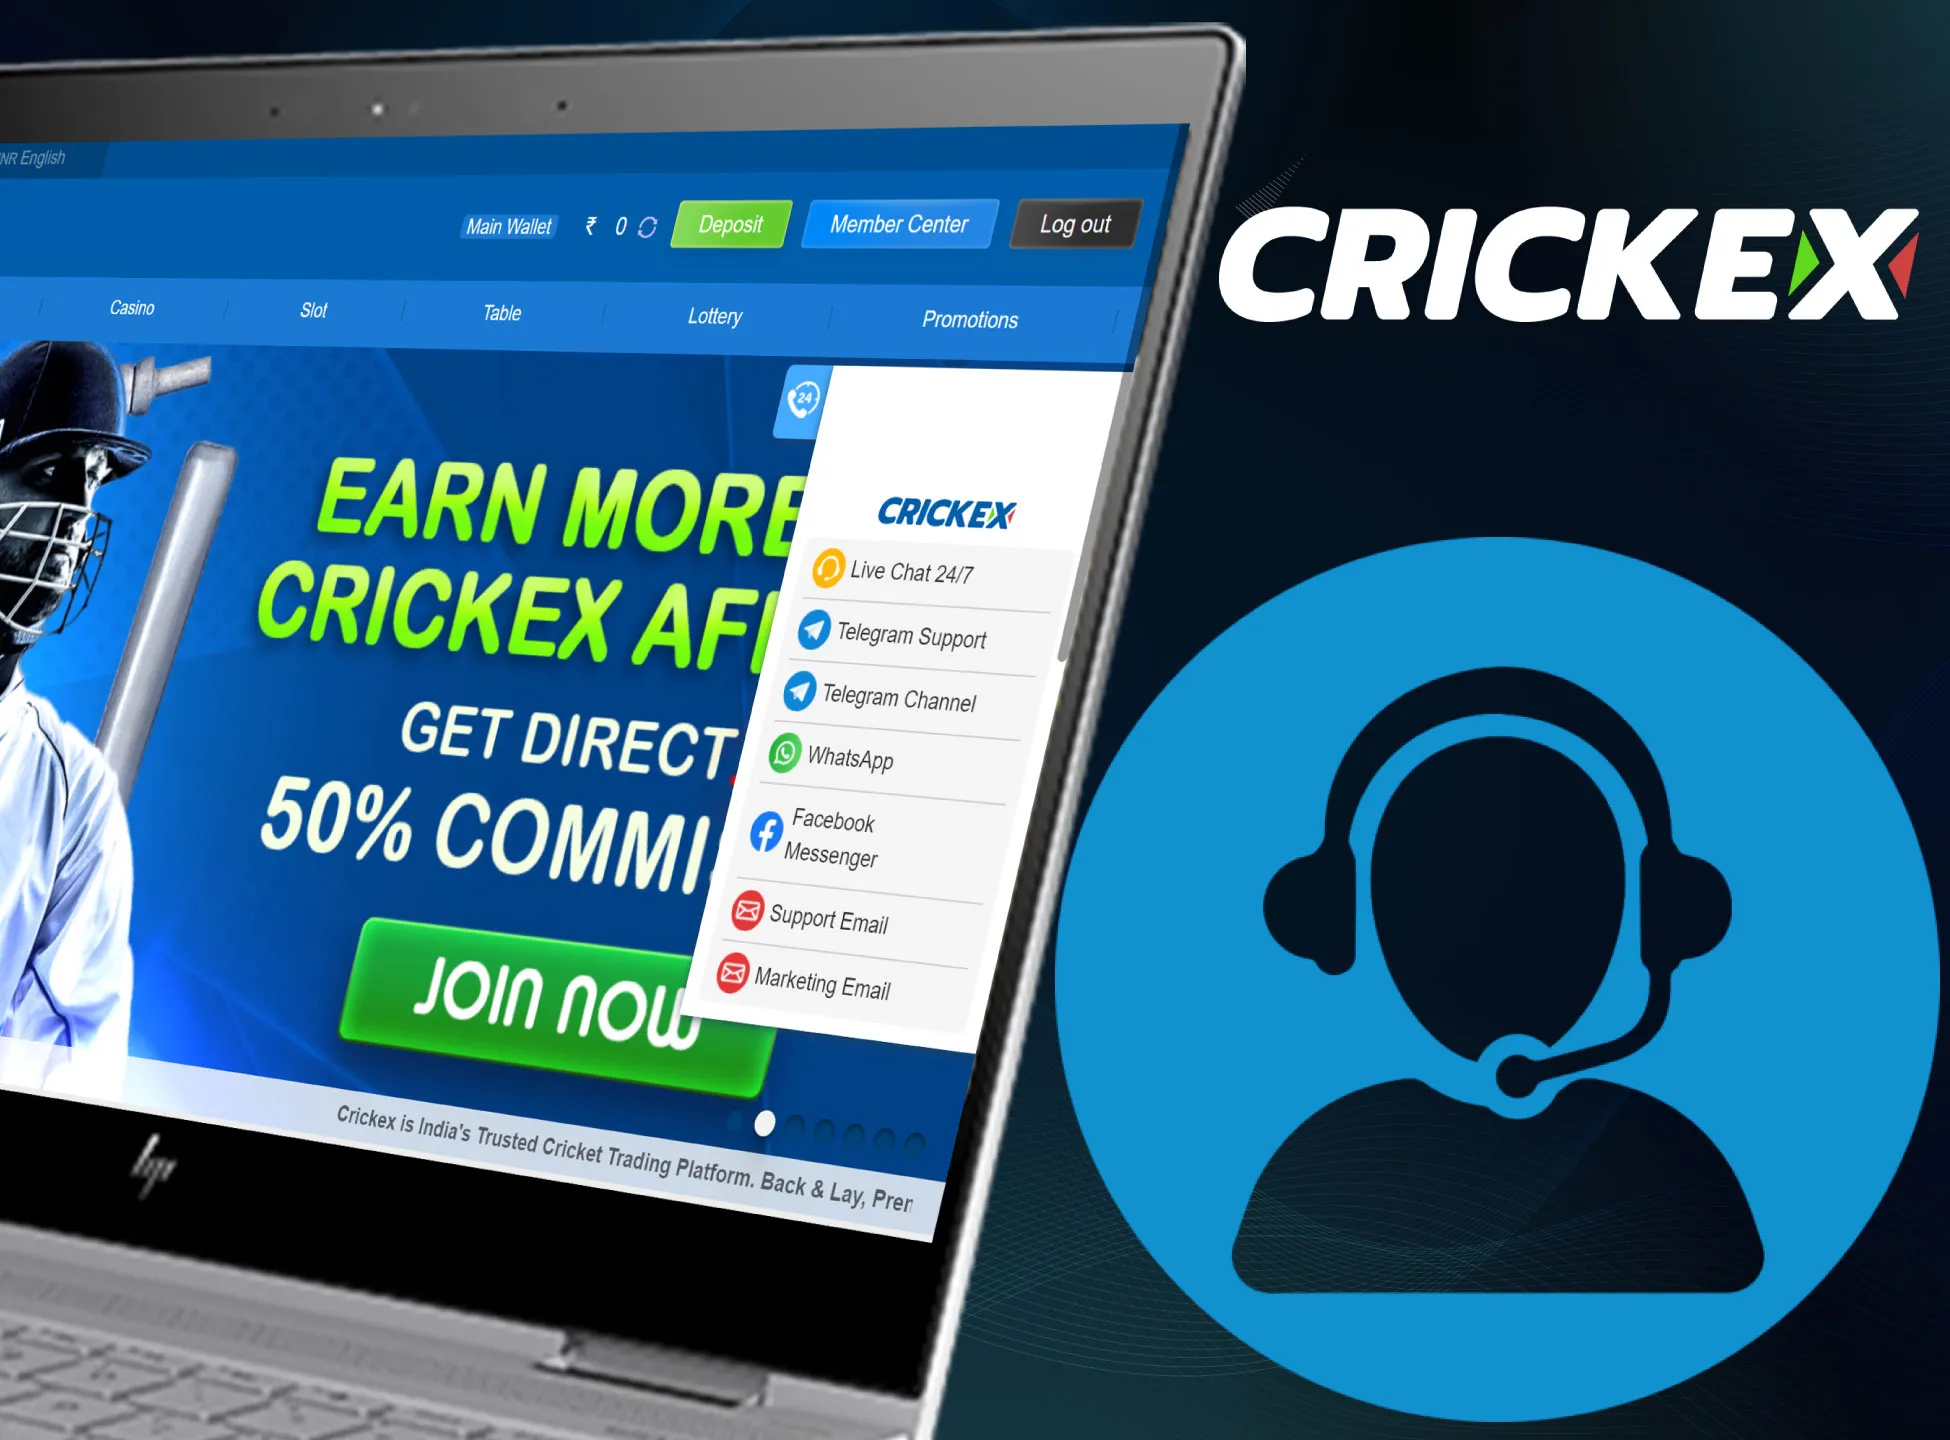 Contact the Crickex team if you have any problems.